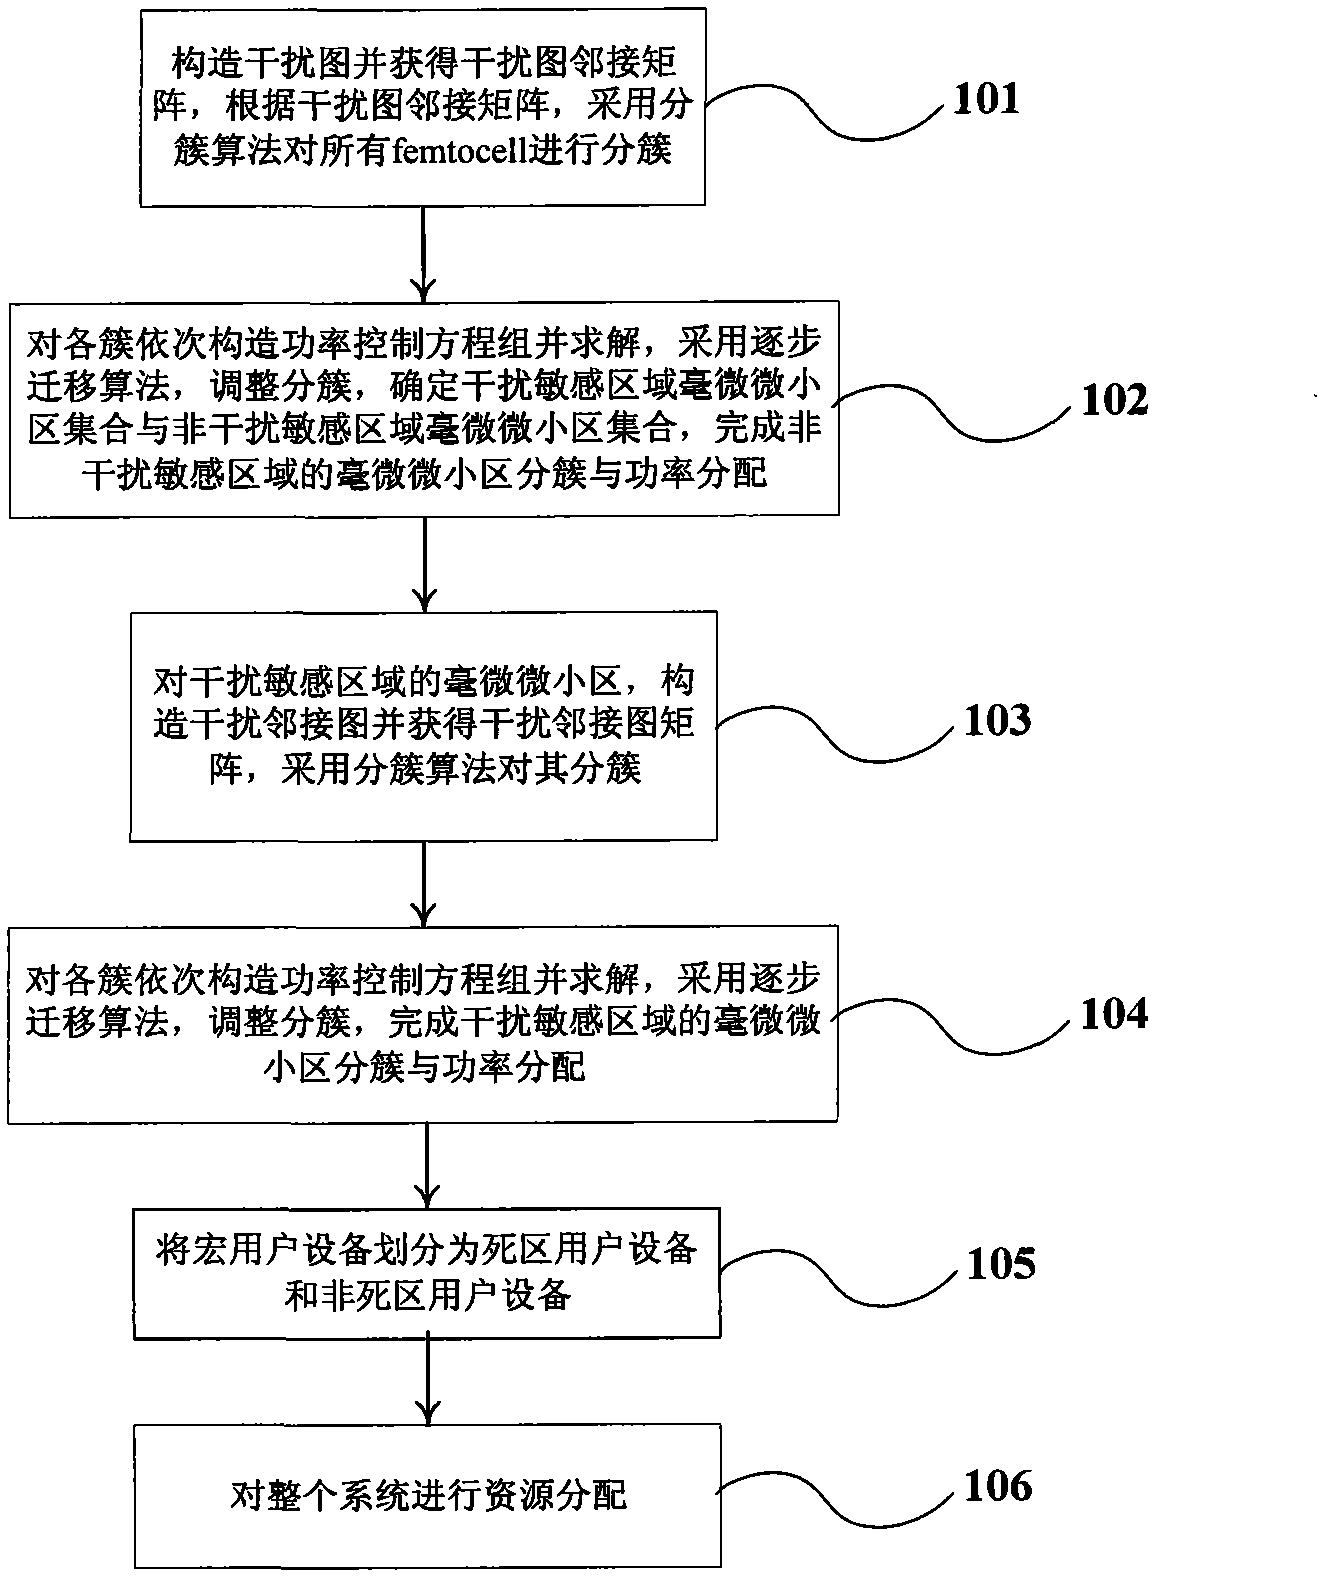 Interference suppression method of hybrid network of macrocell and Femtocell